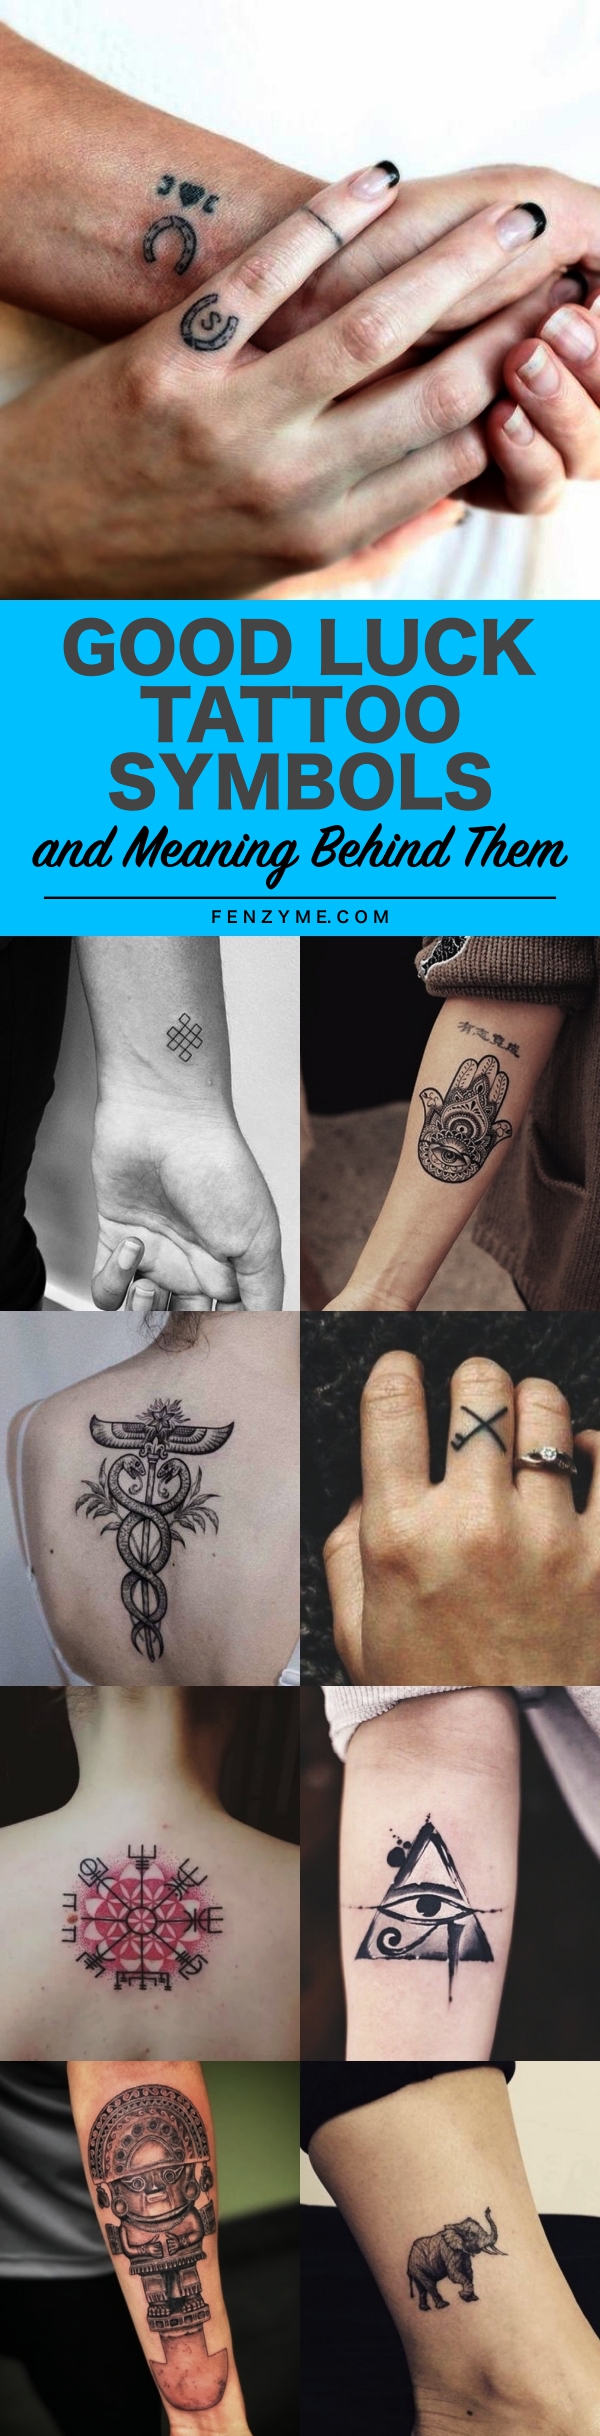 25 Good Luck Tattoo Symbols With Meaning Behind Them